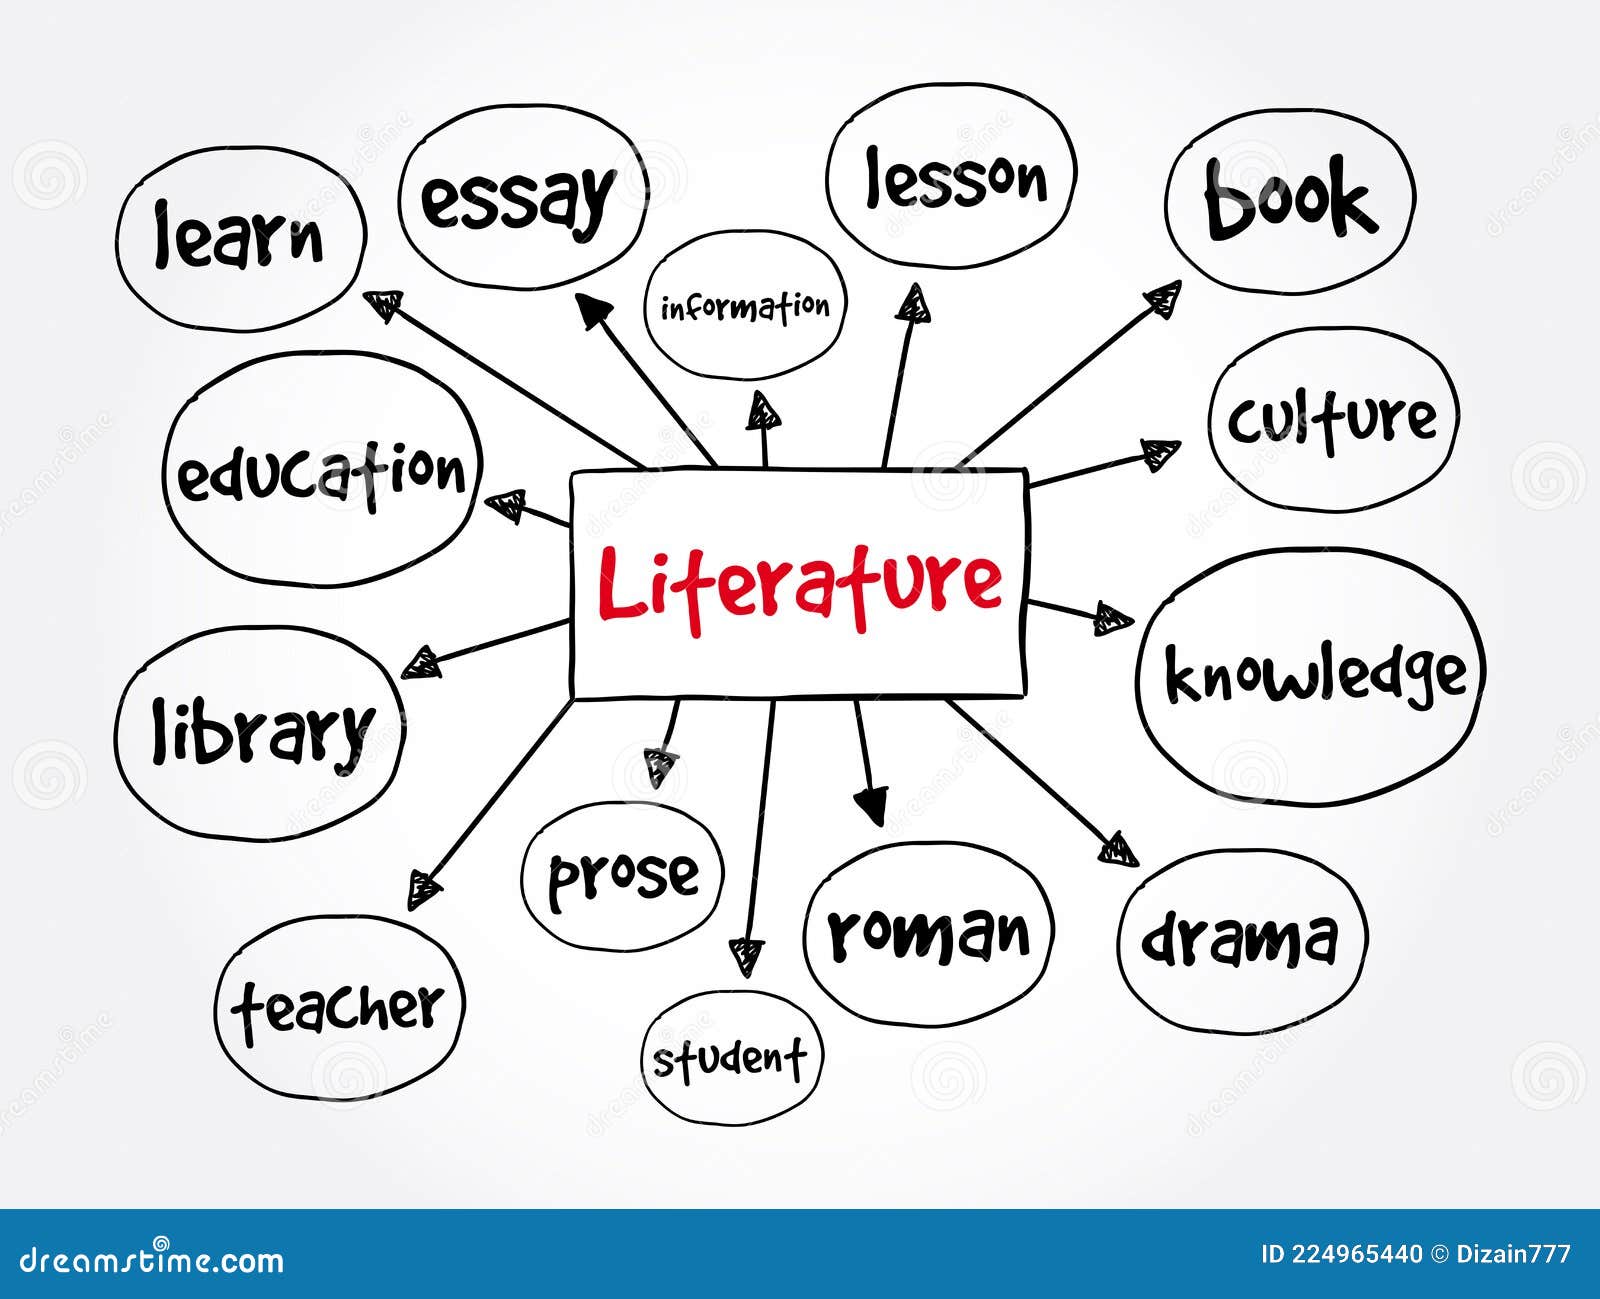 what is the purpose of educational literature